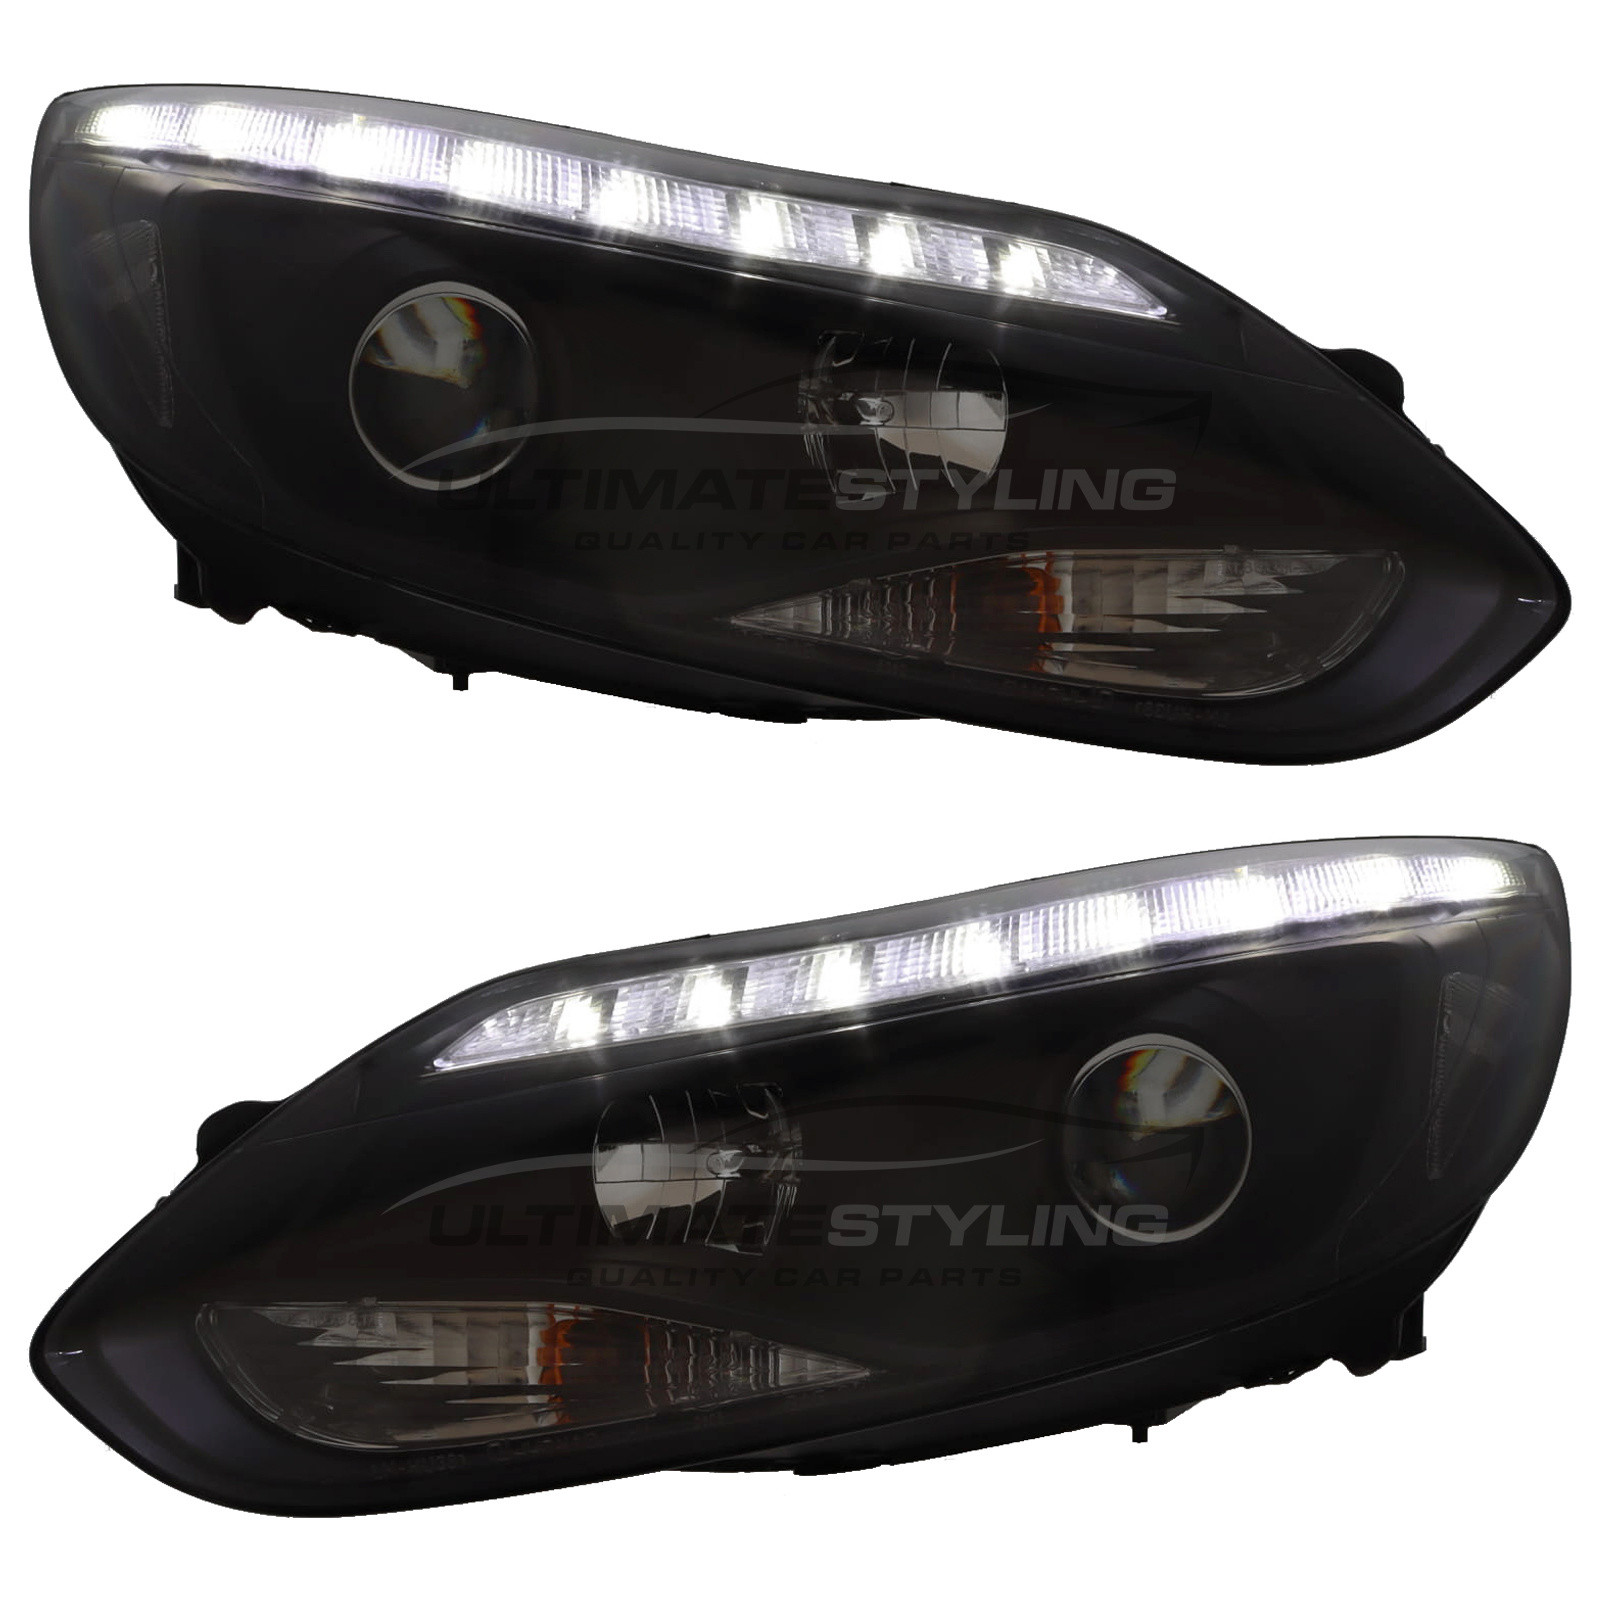 Performance Headlights for Ford Focus